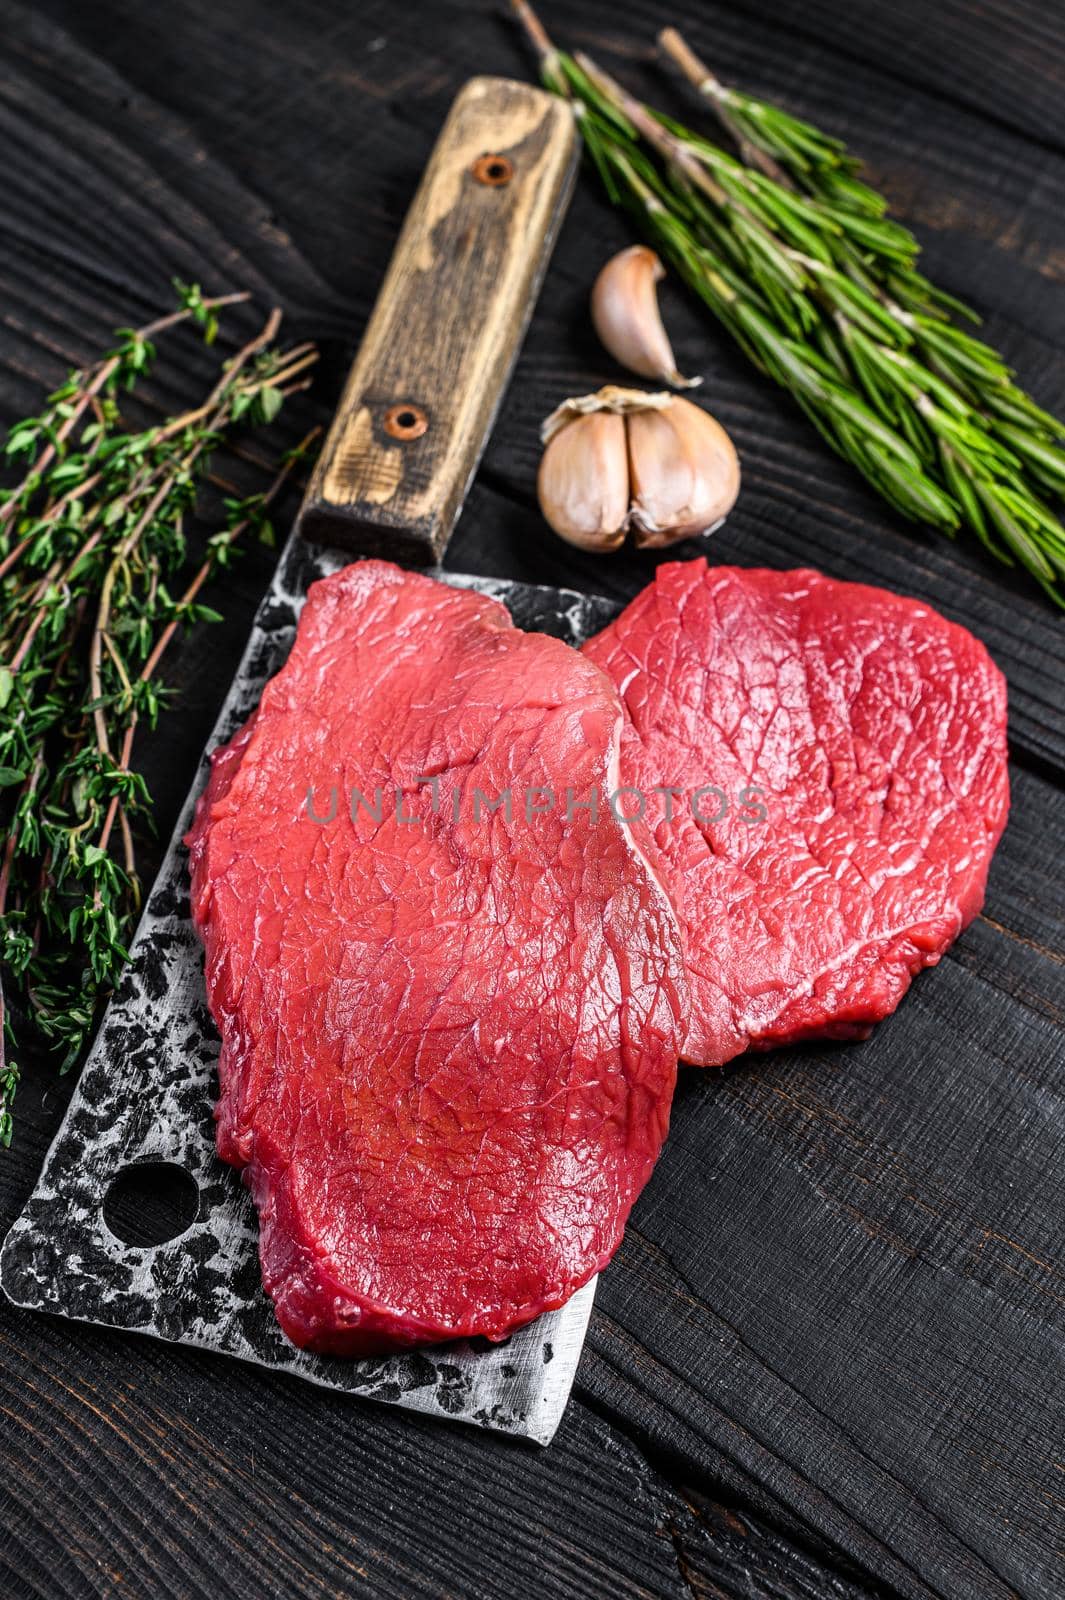 Raw marble beef meat fillet steak on butcher cleaver. Black wooden background. Top view.